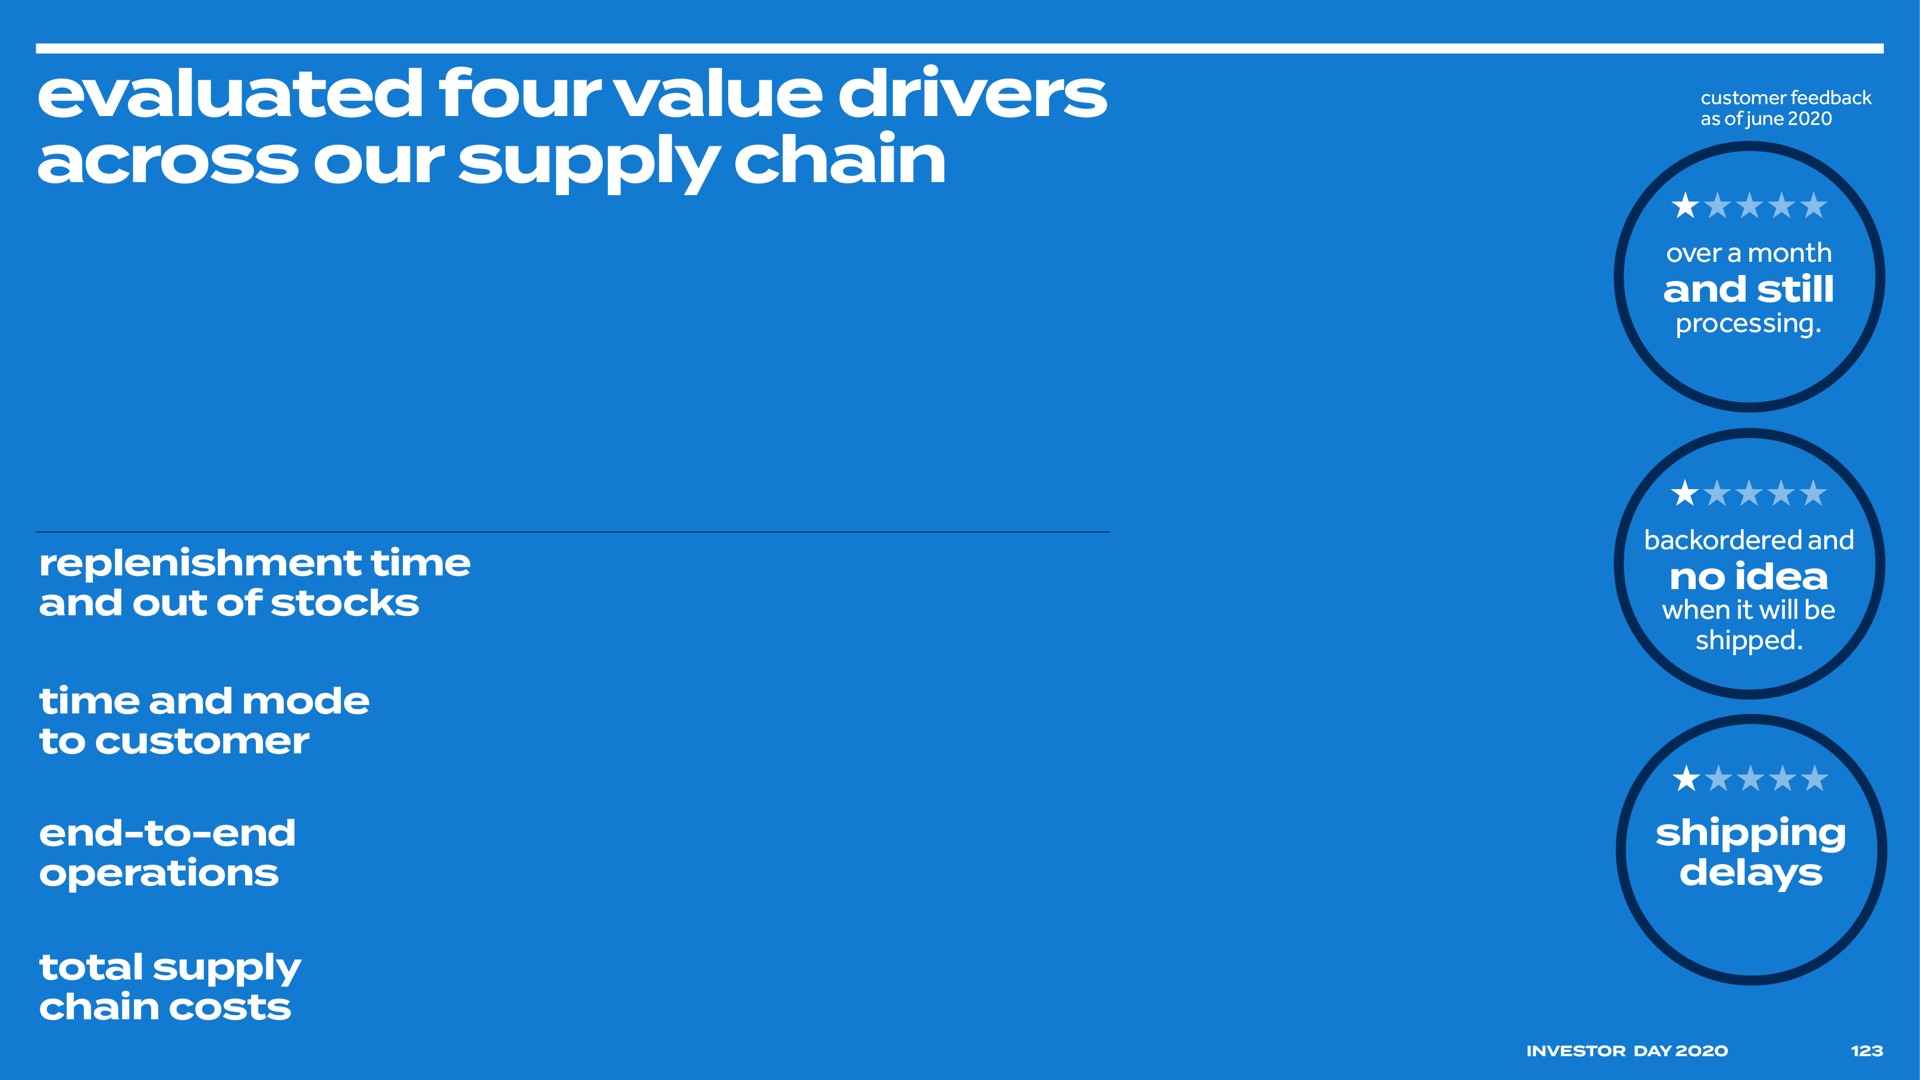 evaluated four value drivers across our supply chain | Bed Bath & Beyond